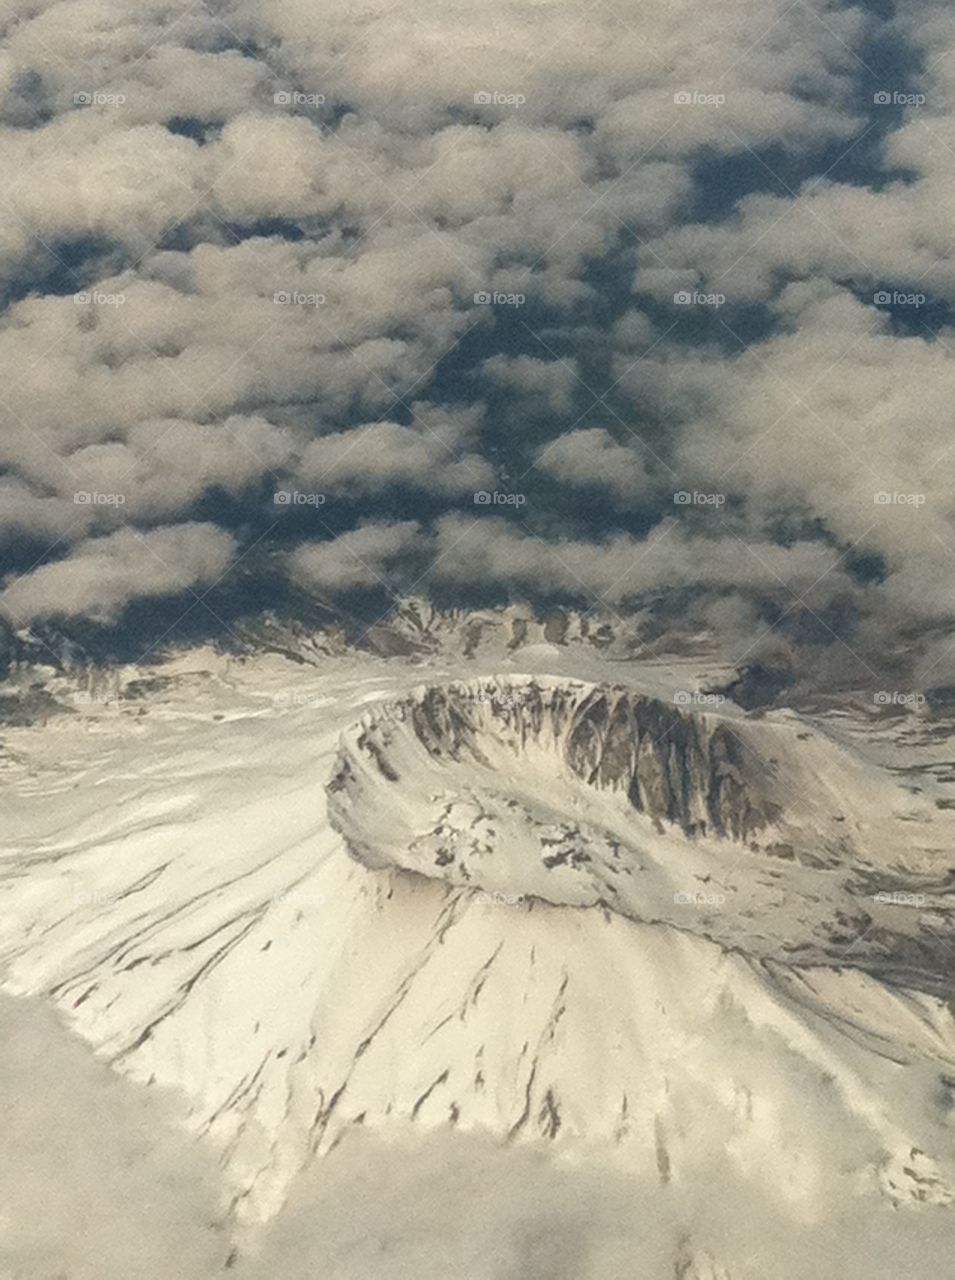 An arial view of Mount Saint Helens's dormant volcanic, snow covered crater. The view looking out from my window seat while on a flight to Vegas